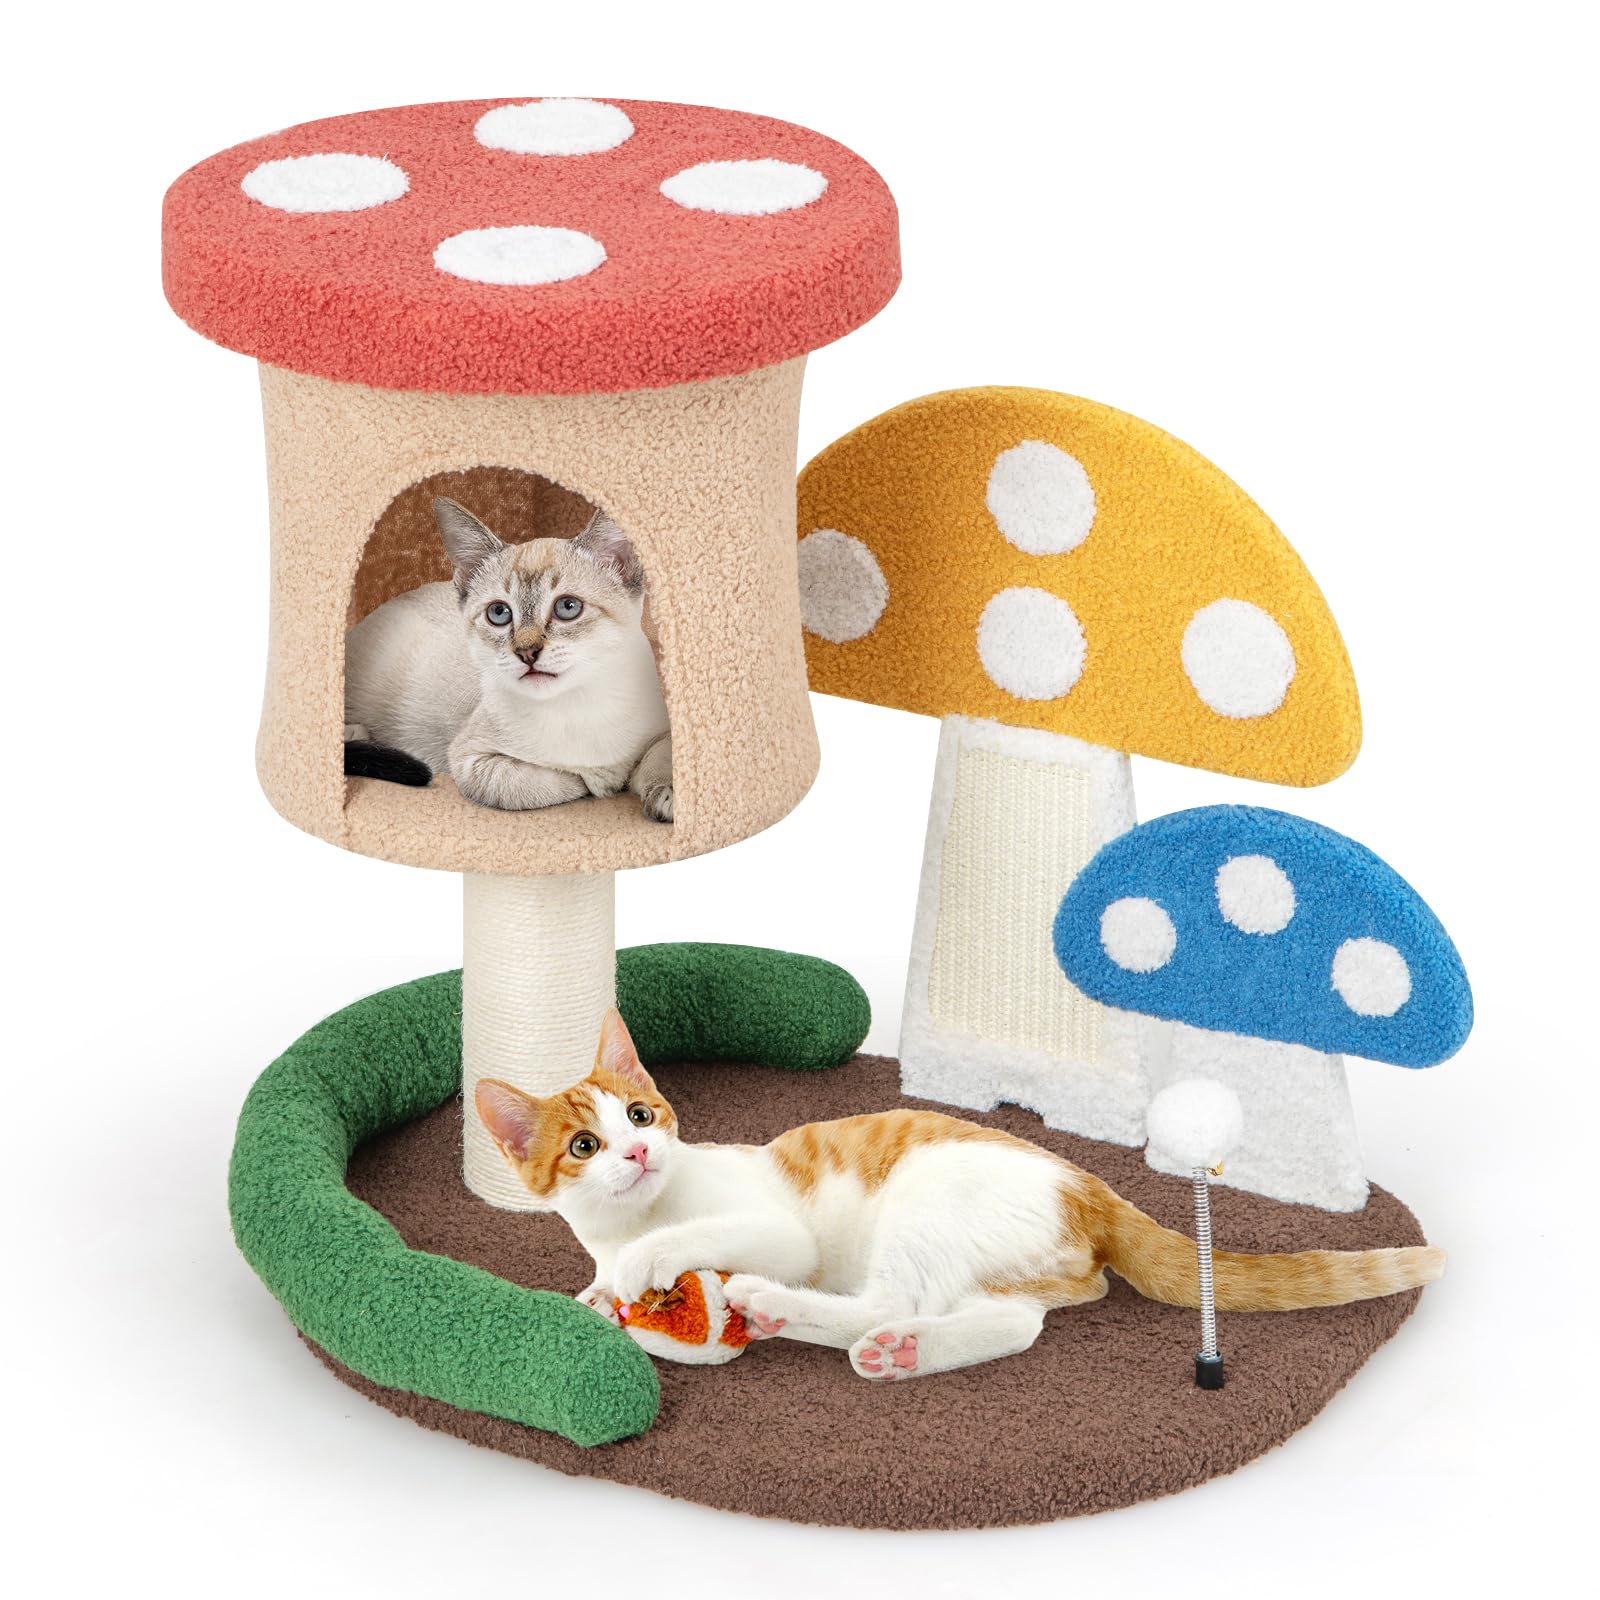 Tangkula Mushroom Cat Tree, Cute Cat Tower with Full-Wrapped Sisal Post, Scratching Board & Spring Ball